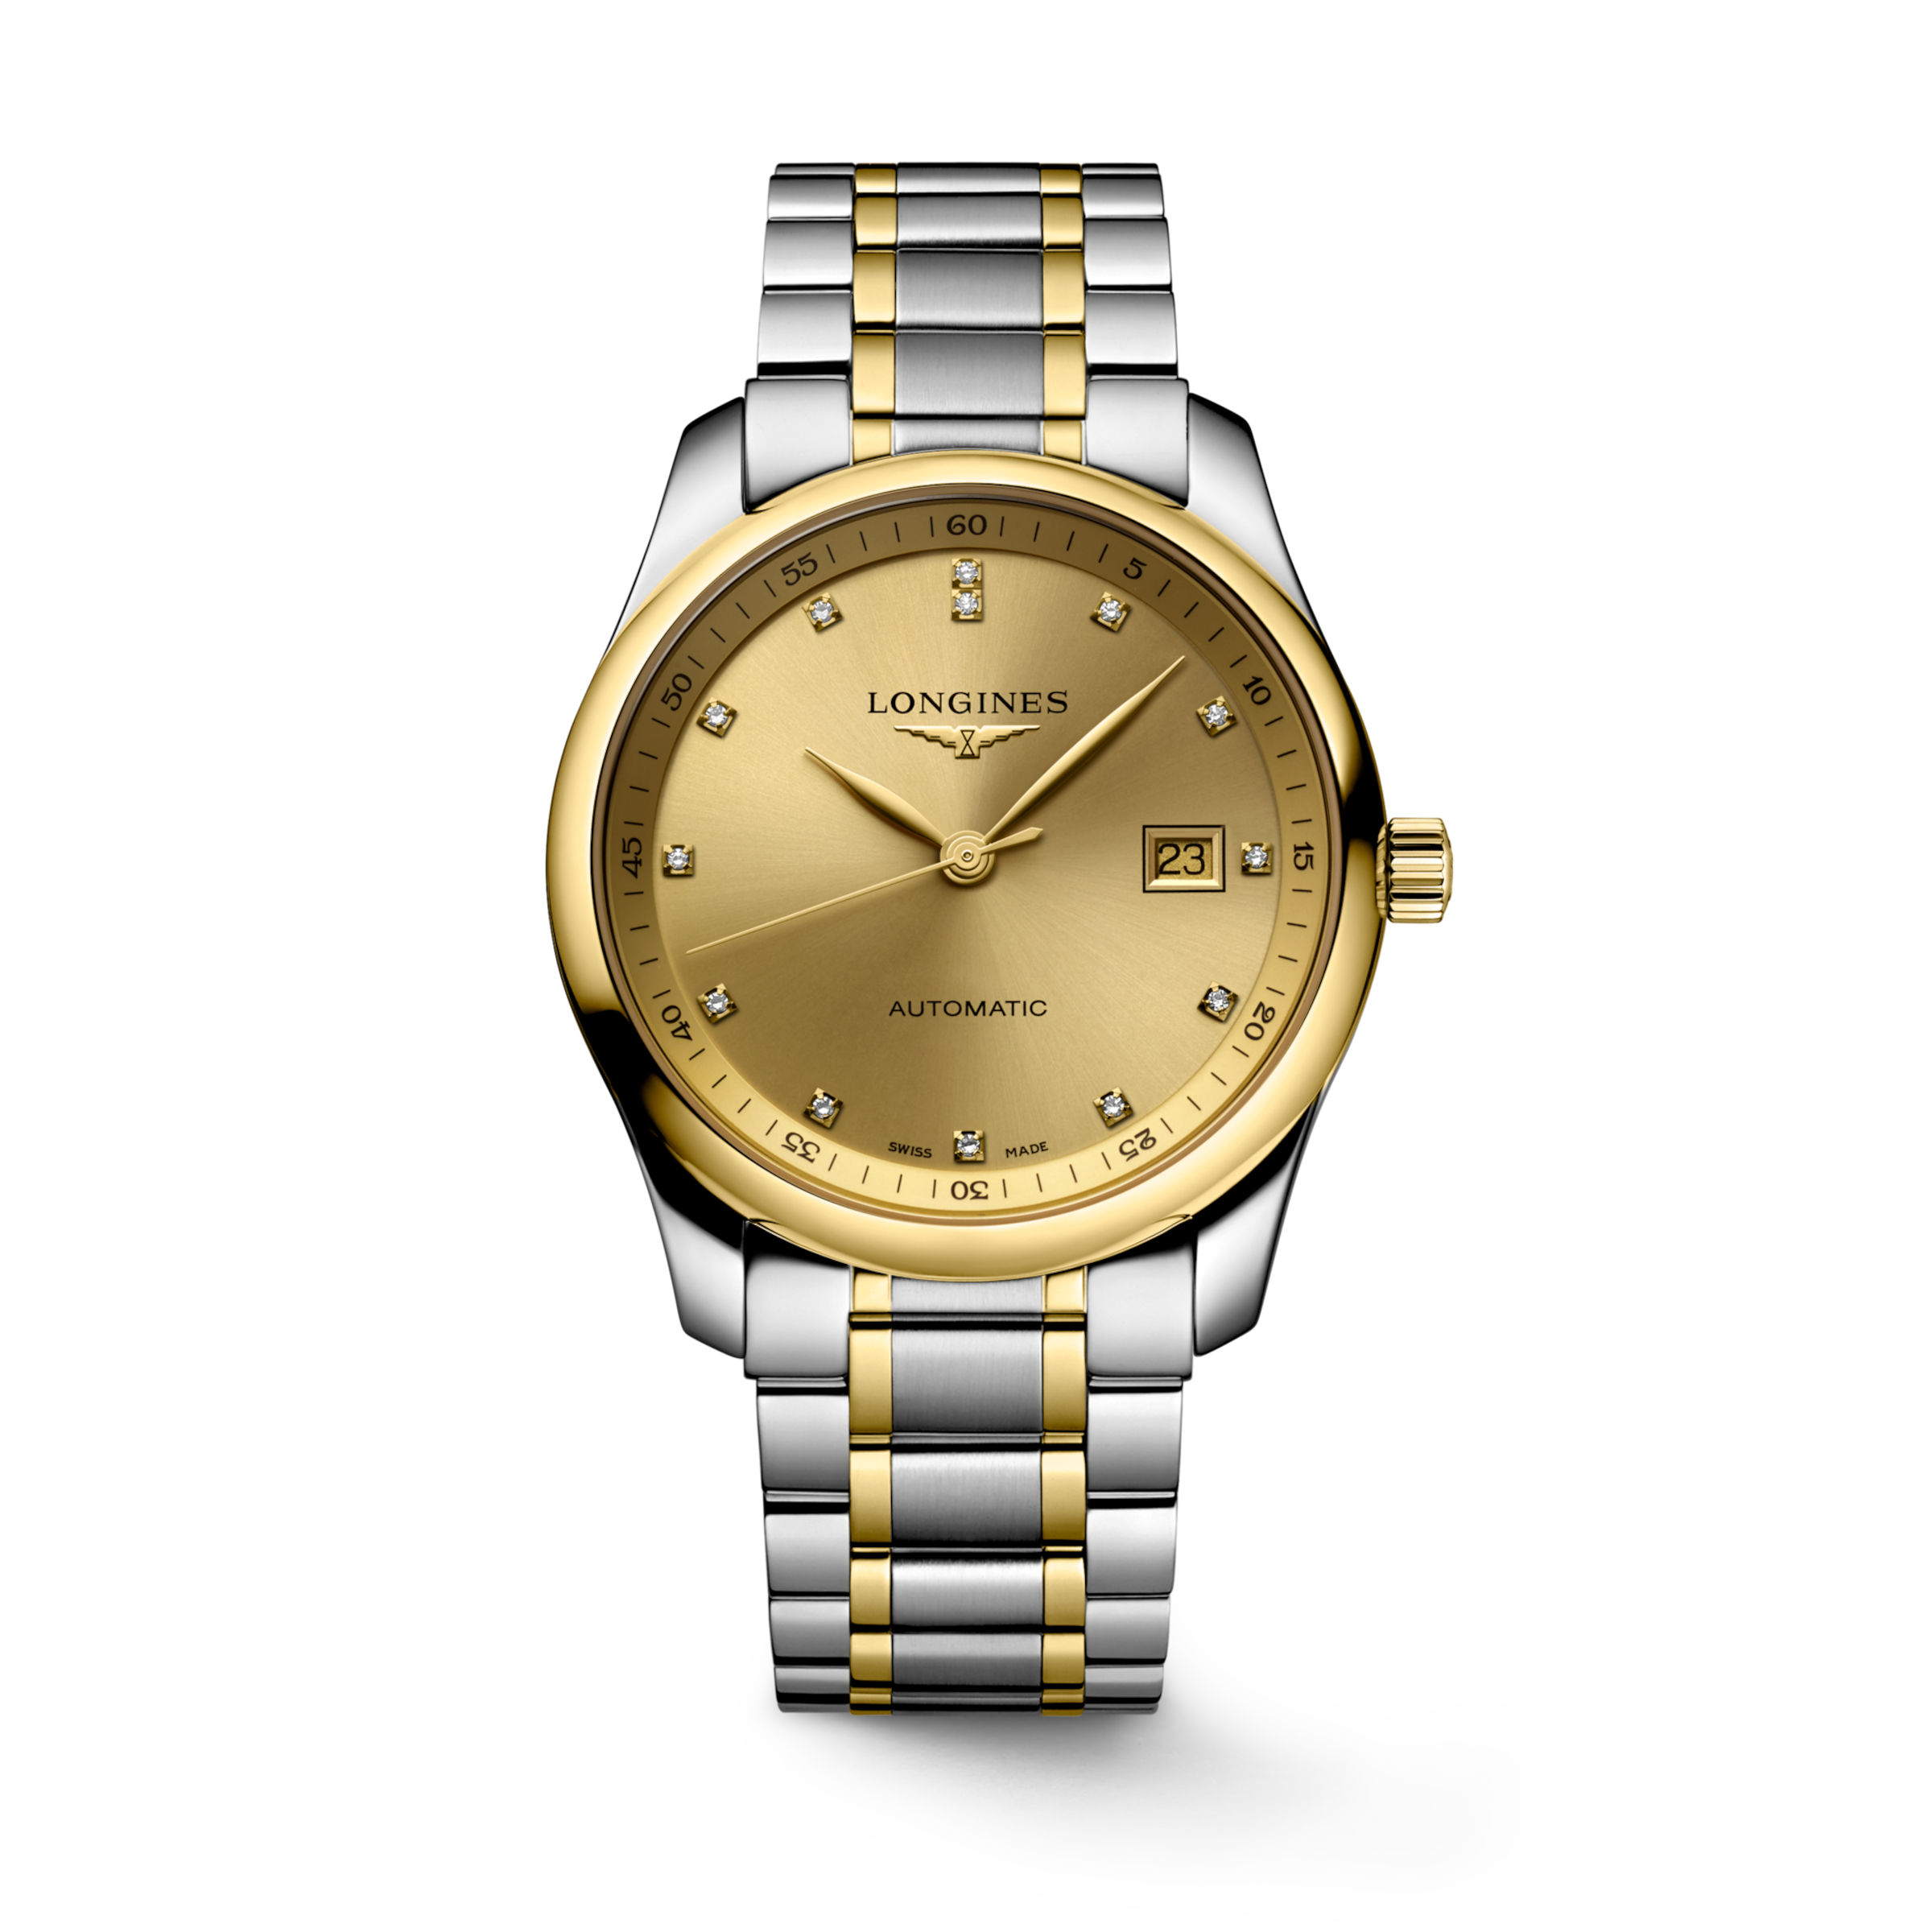 Longines MASTER COLLECTION Automatic Stainless steel and 18 karat yellow gold cap 200 Watch - L2.793.5.37.7